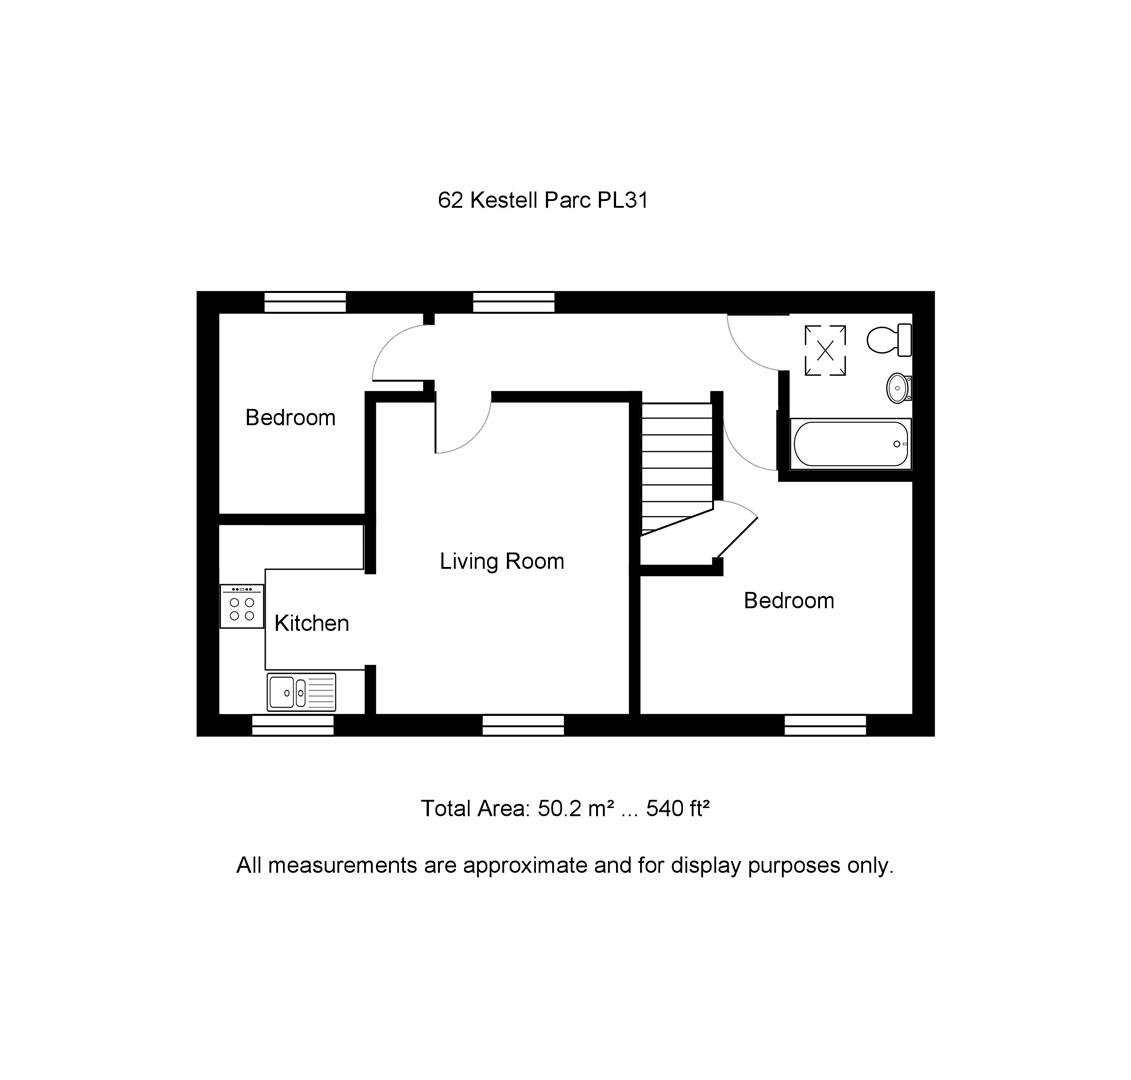 2 bed apartment to rent in Kestell Parc, Bodmin - Property floorplan